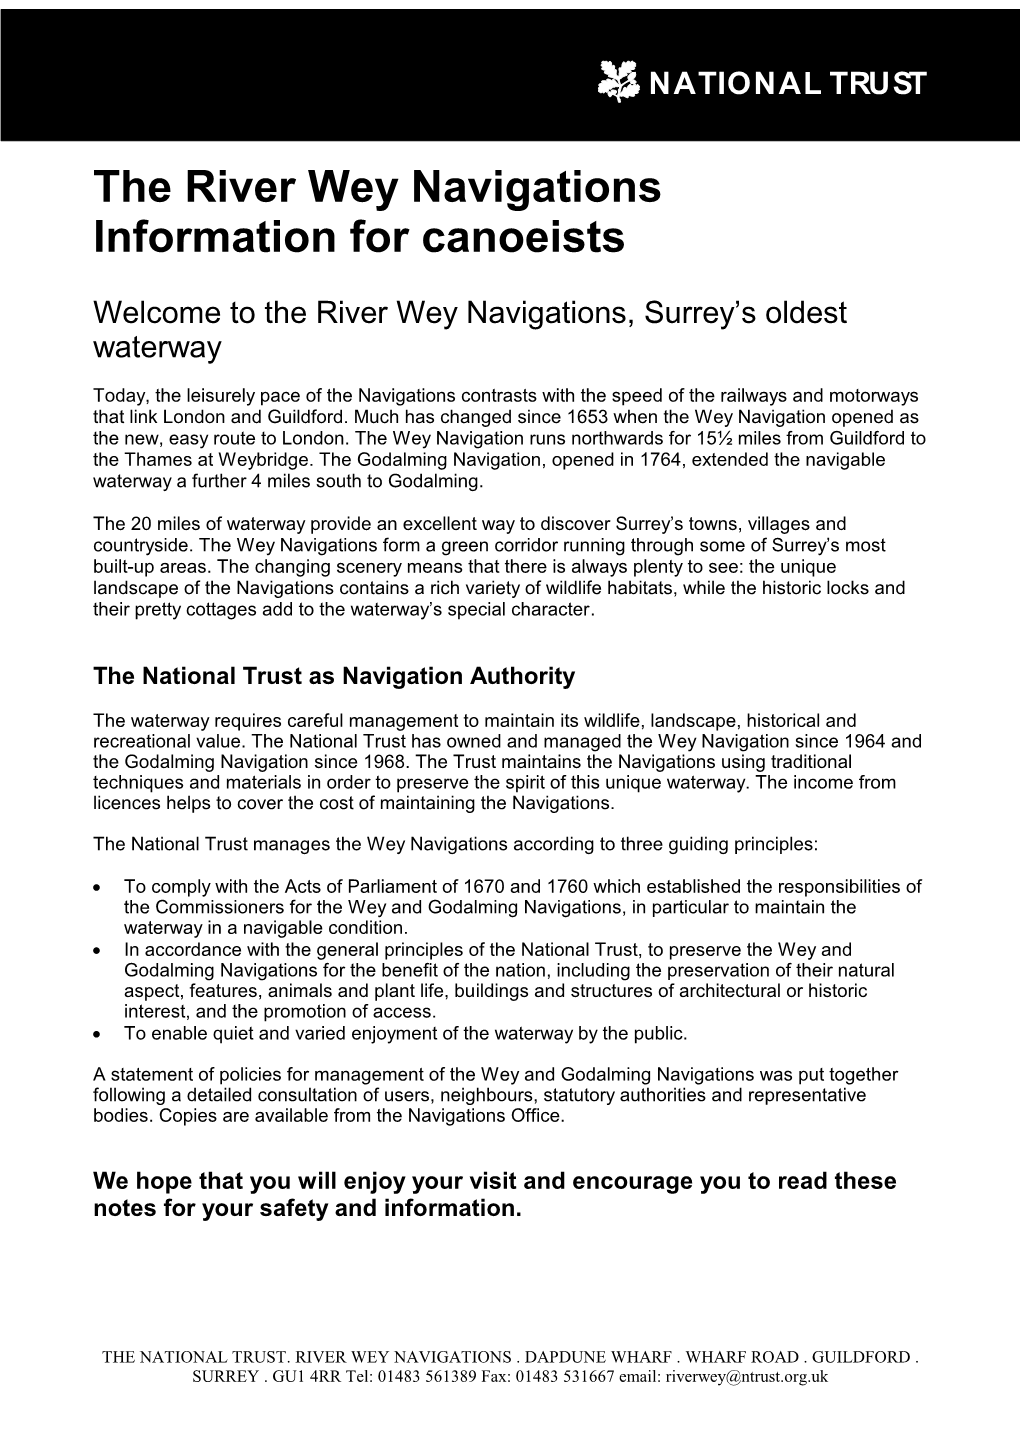 The River Wey Navigations Information for Canoeists